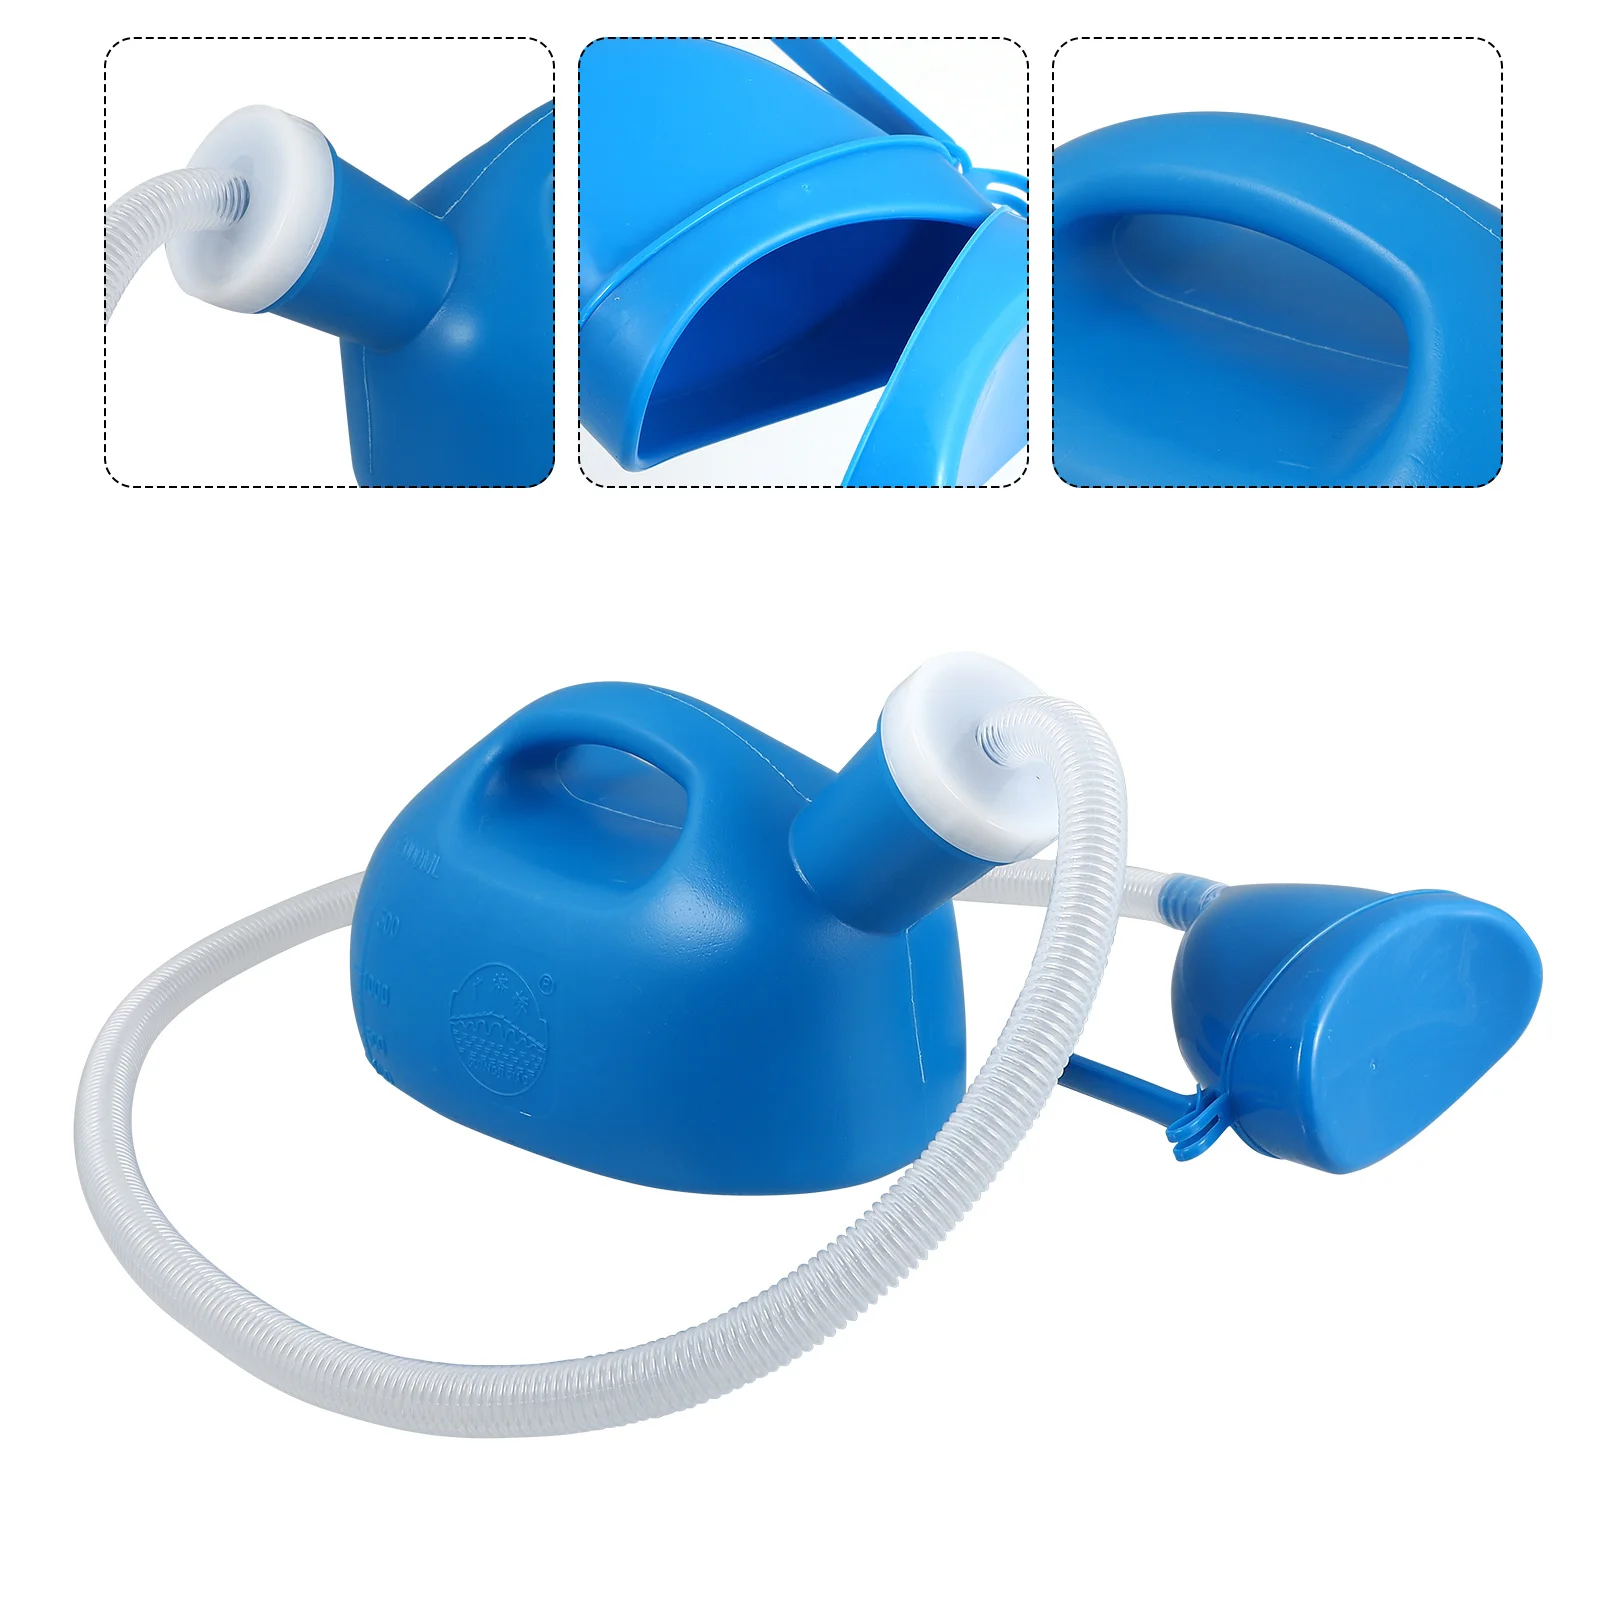 

Car Urinal Urinary Pot Plastic Elderly Pee Bottle Portable Chamber Emergency Urination Device Toilet Go Containers